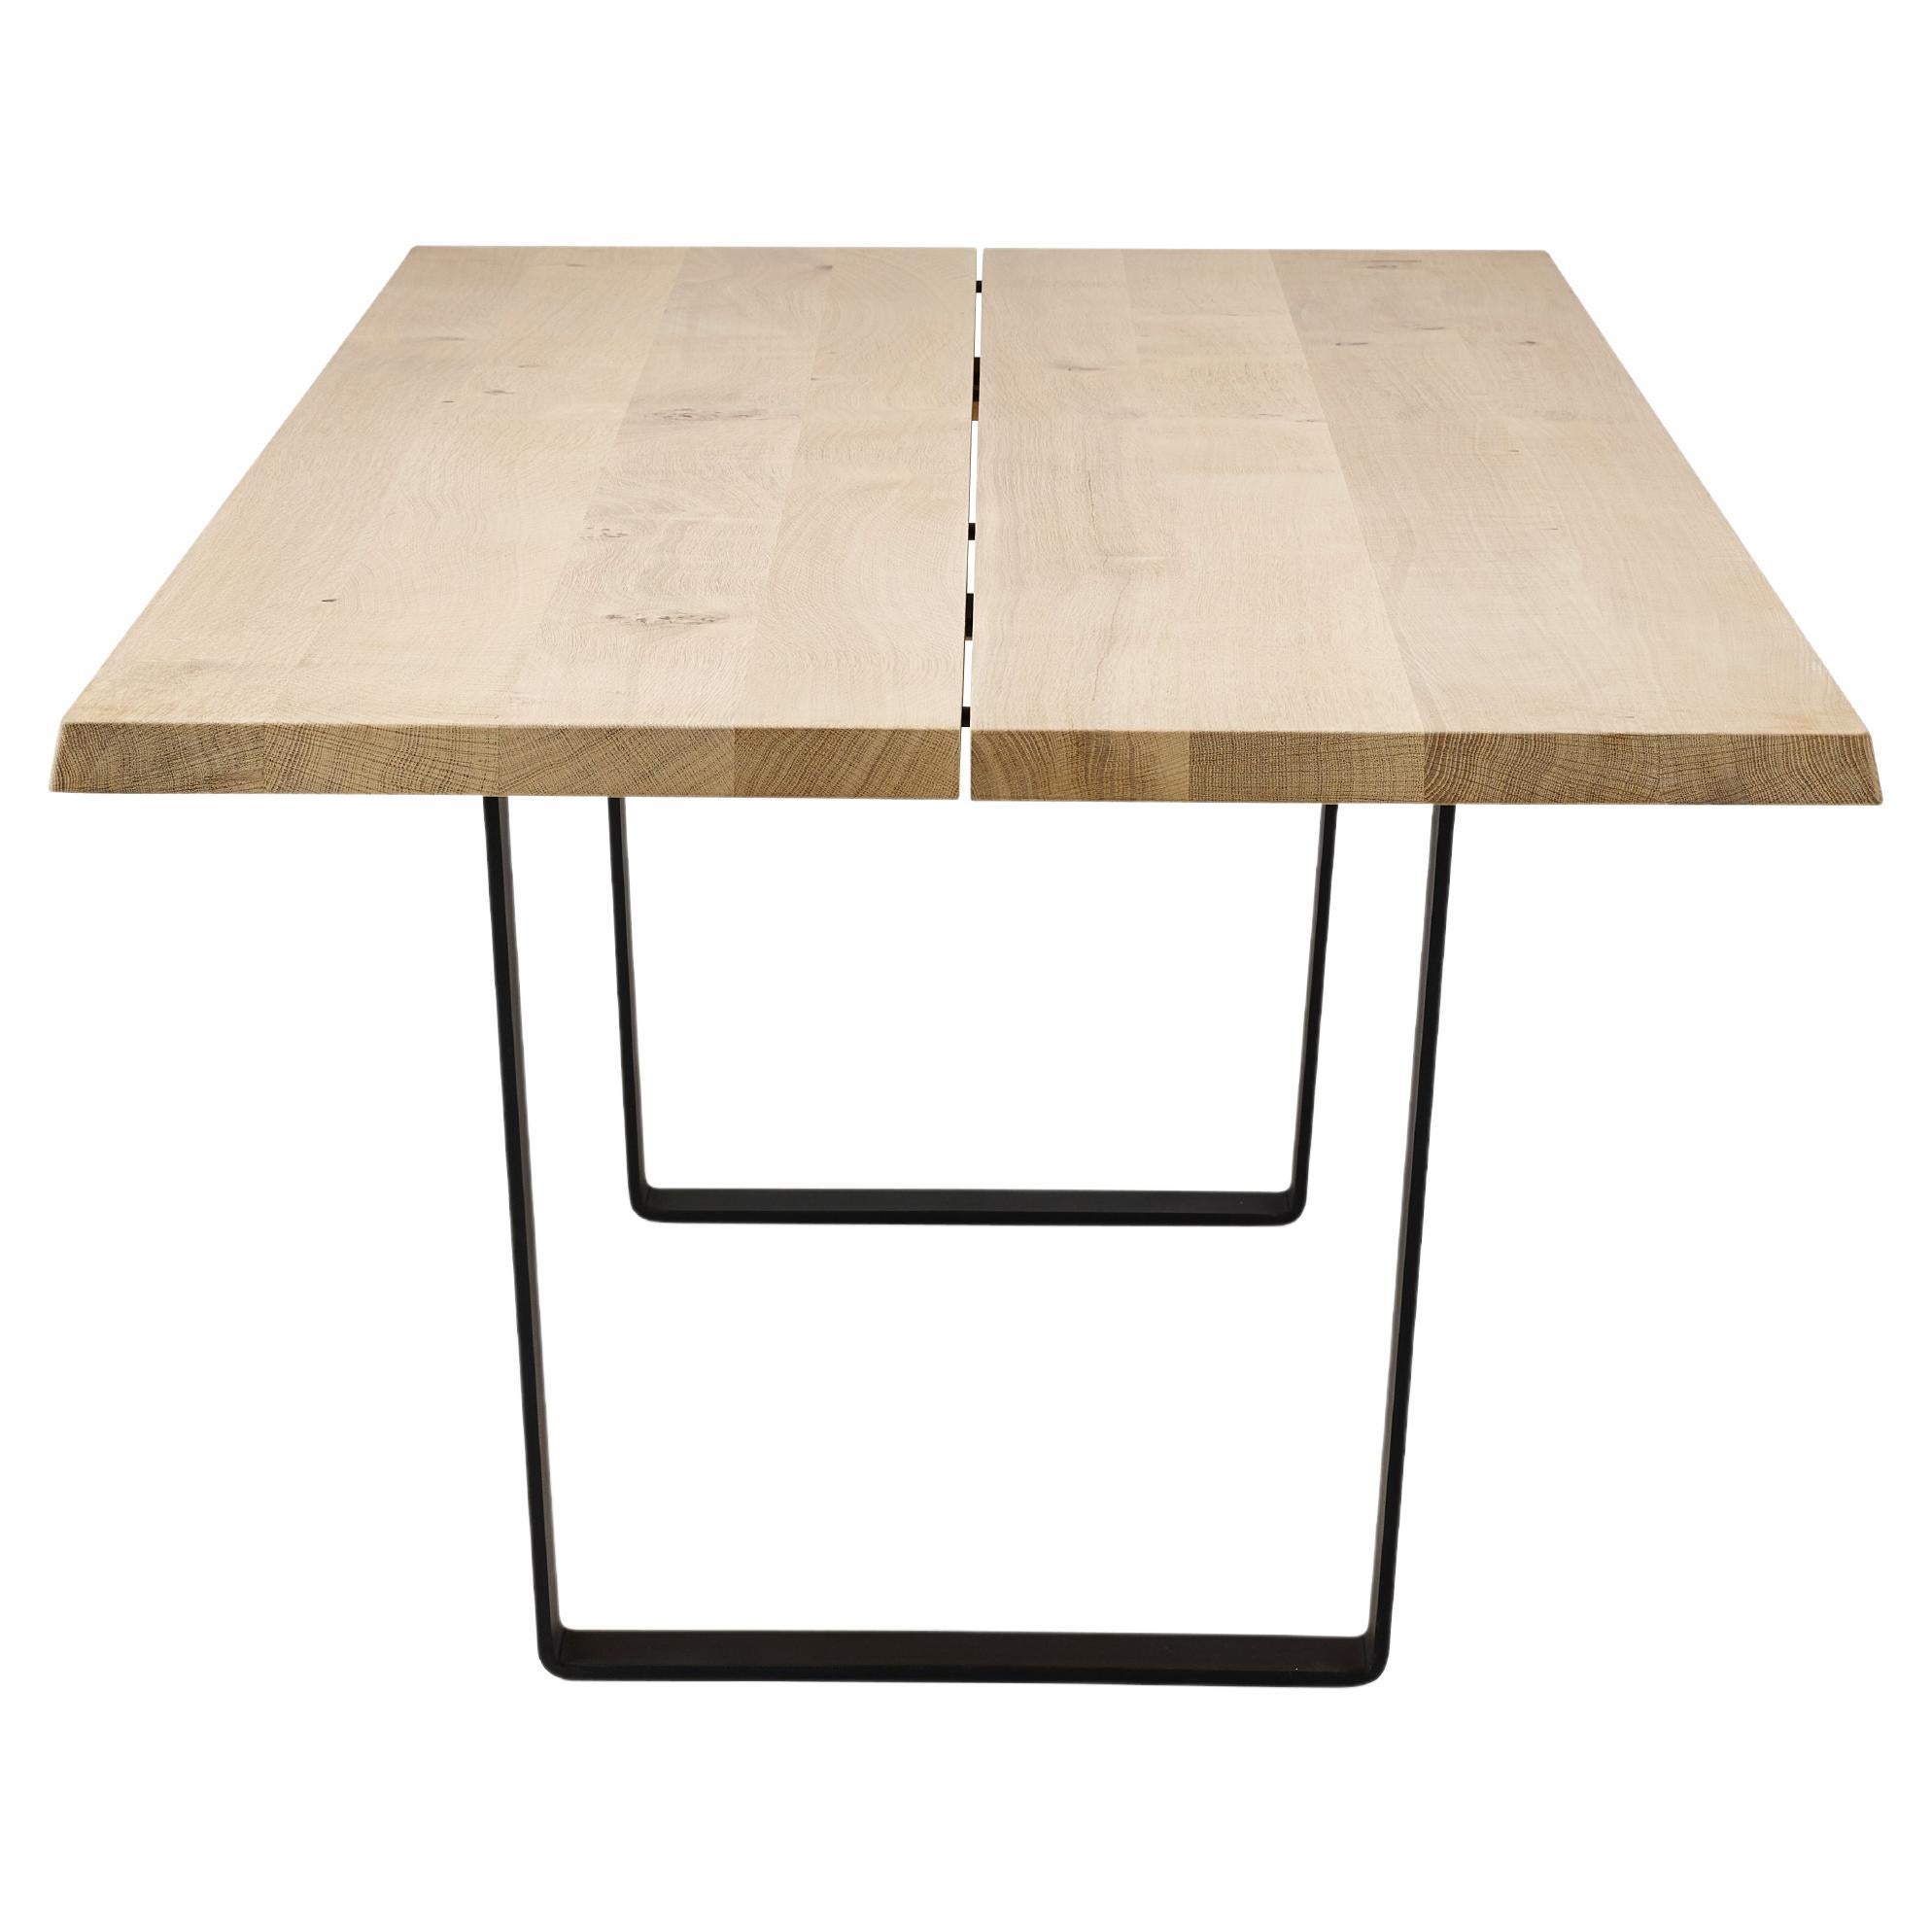 Lowlight dining table, rectangular, 270 cm.

Solid wood tabletop and black powder coated steel legs. 
Handmade in Denmark.

Measure: height: 72 or 74 cm.

Tabletop dimensions:
– 180 x 100 cm
– 200 x 100 cm
– 220 x 100 cm
– 240 x 100 cm
–